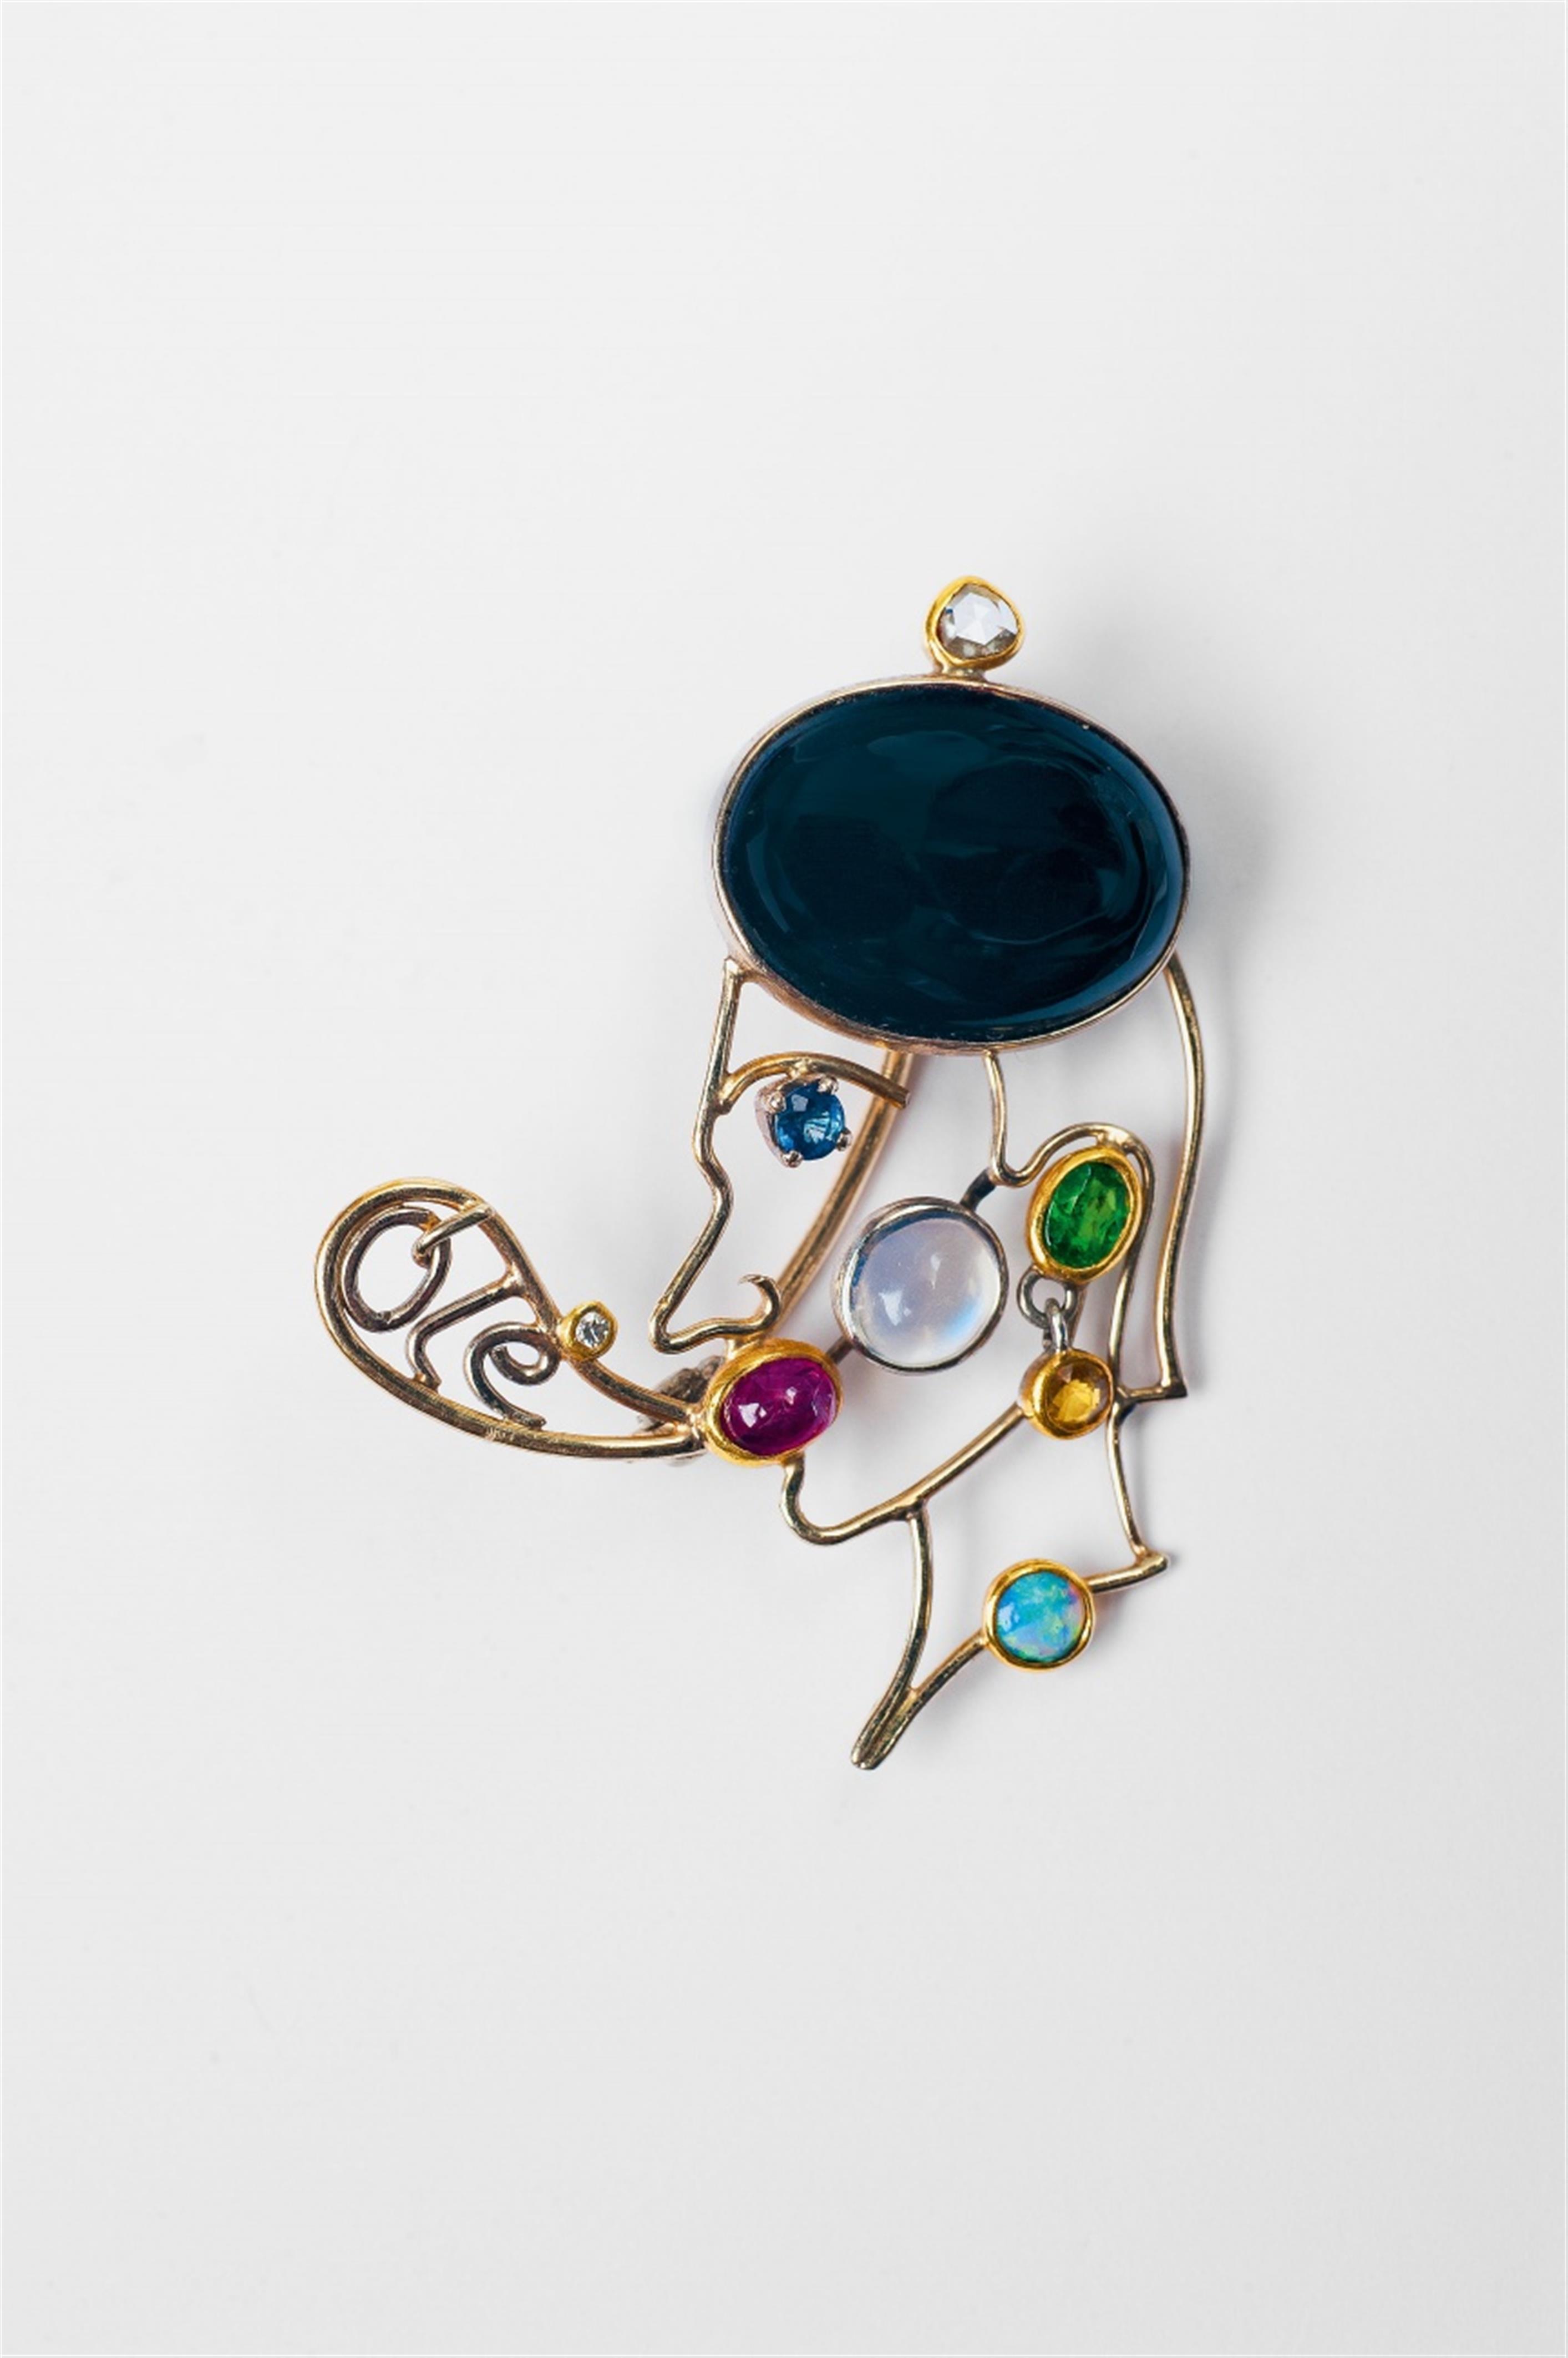 An 18k gold gem-set brooch of a male head with speech bubble by Falko Marx, Cologne - image-2